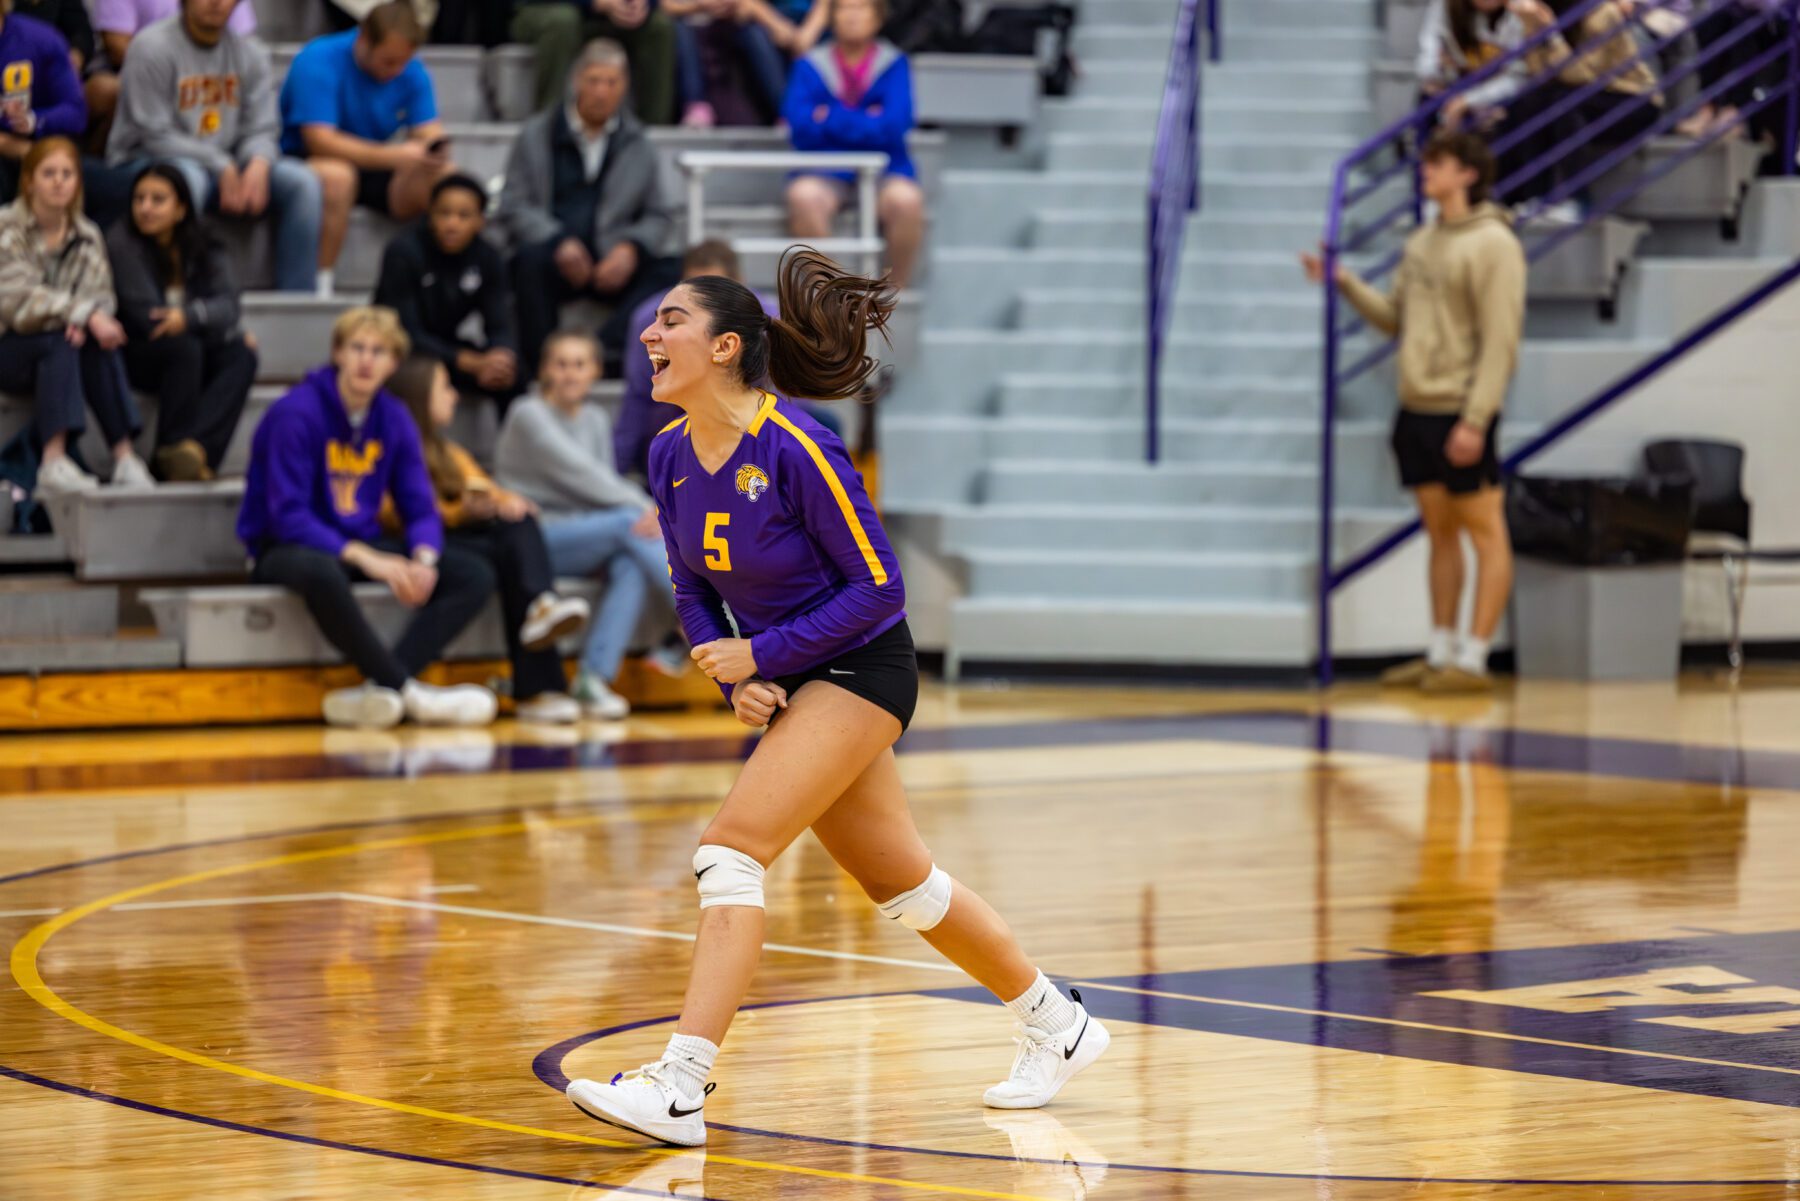 Sara Serafimova celebrates after a point in the volleyball game.